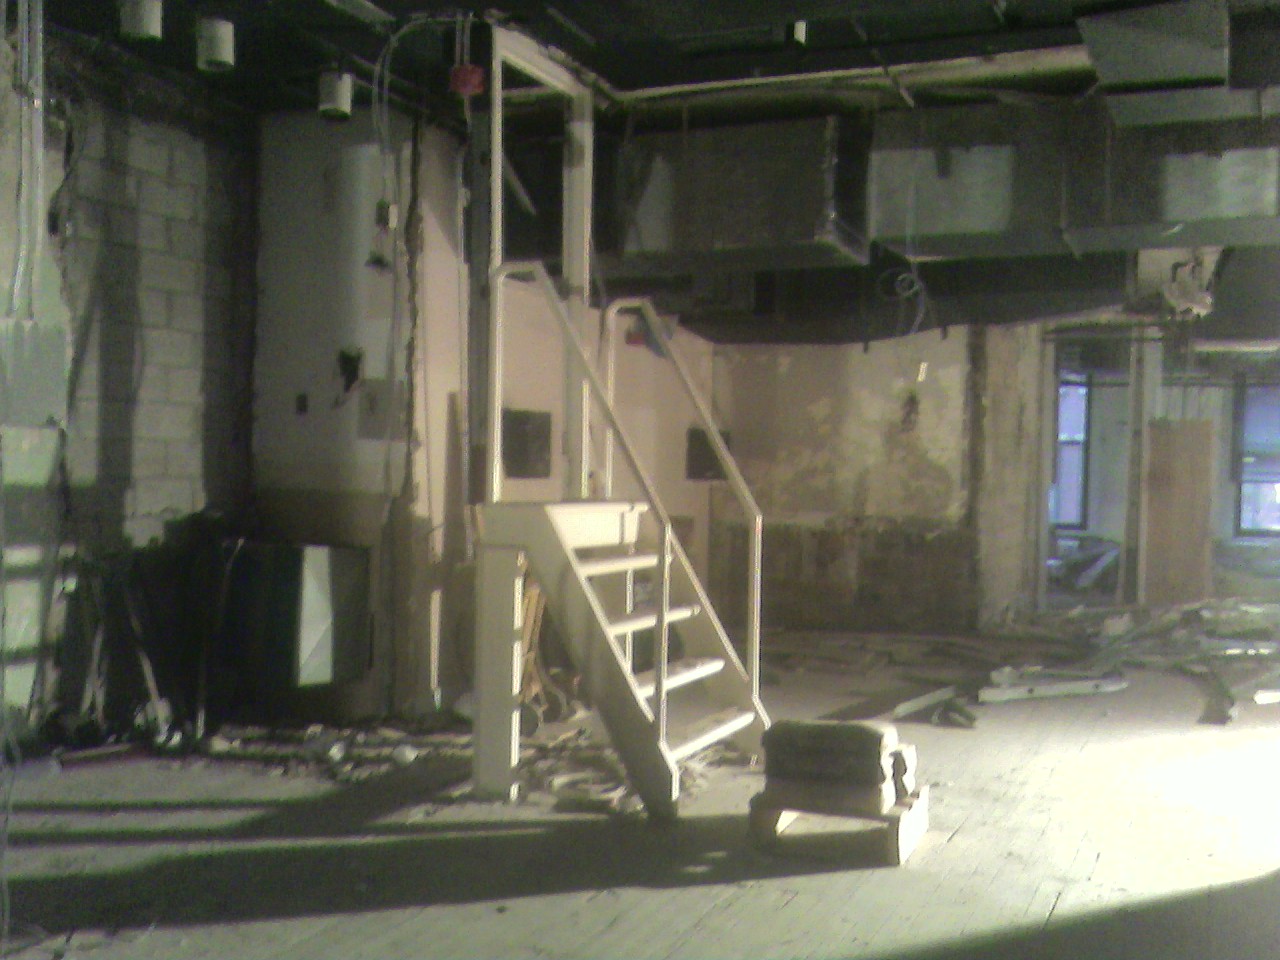 The stairway up to the projection booth during the renovation.